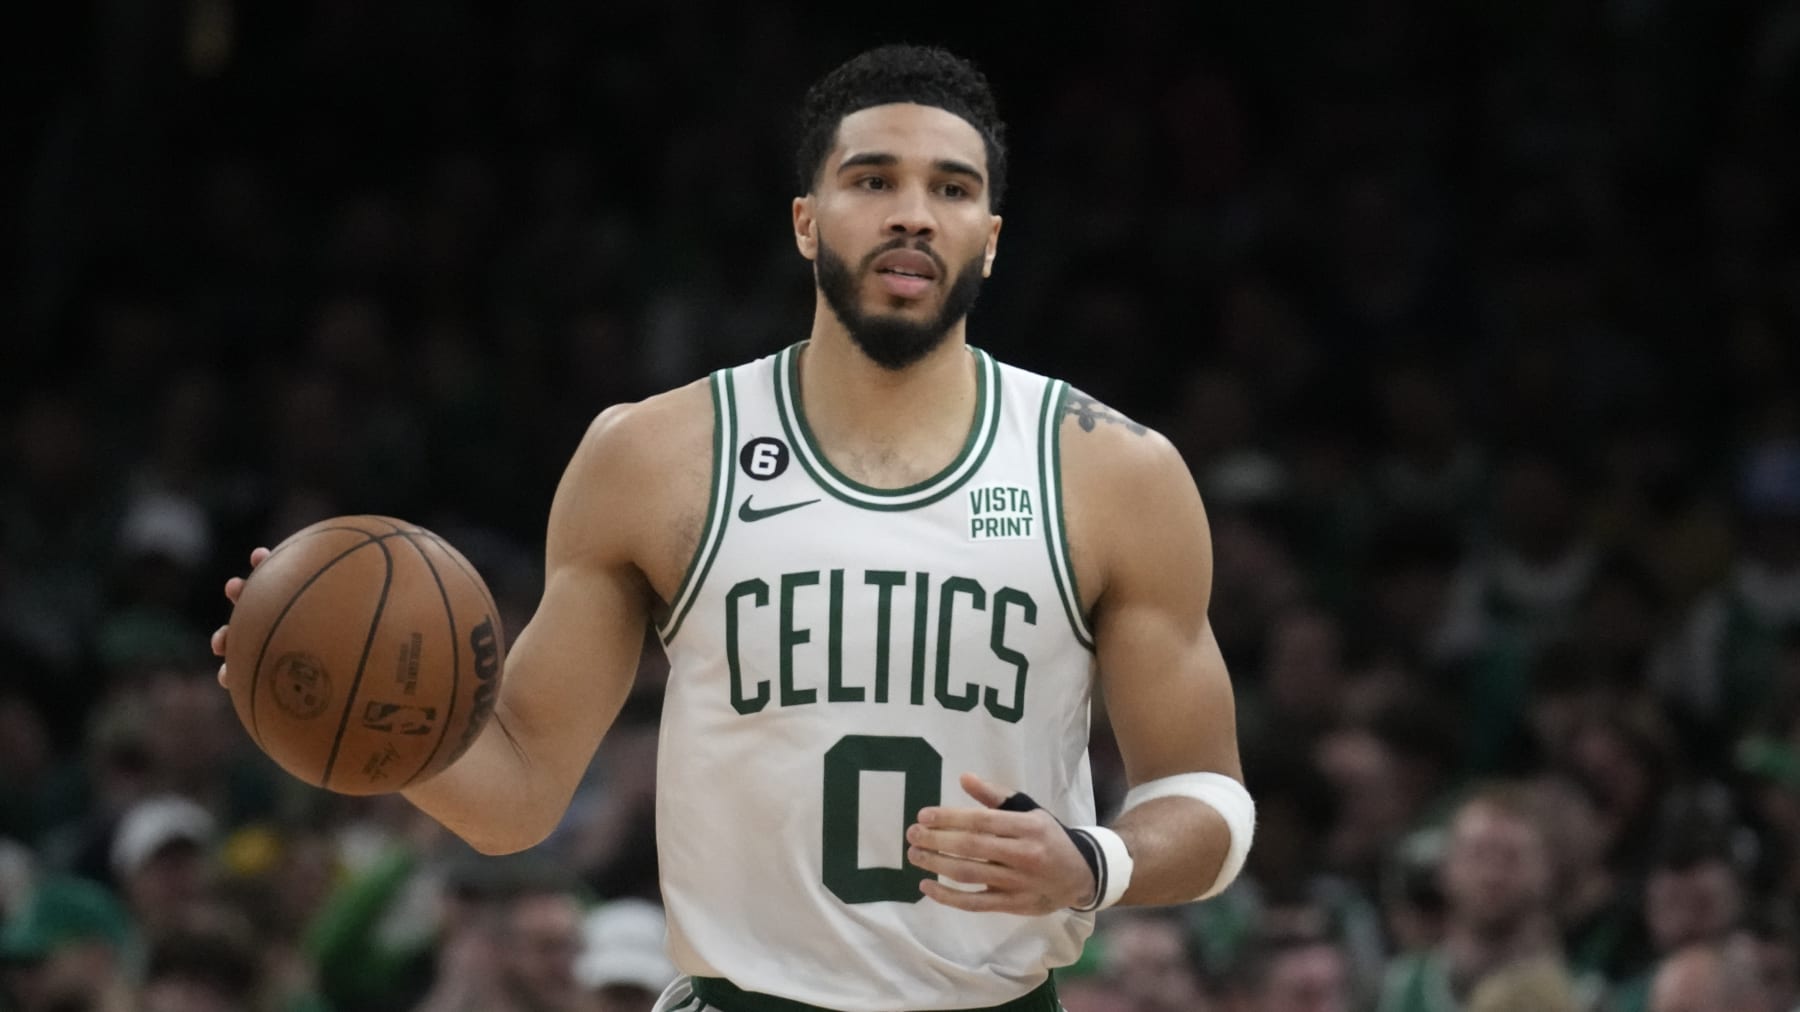 6 Things We Hope to See From Jayson Tatum at Jordan Brand